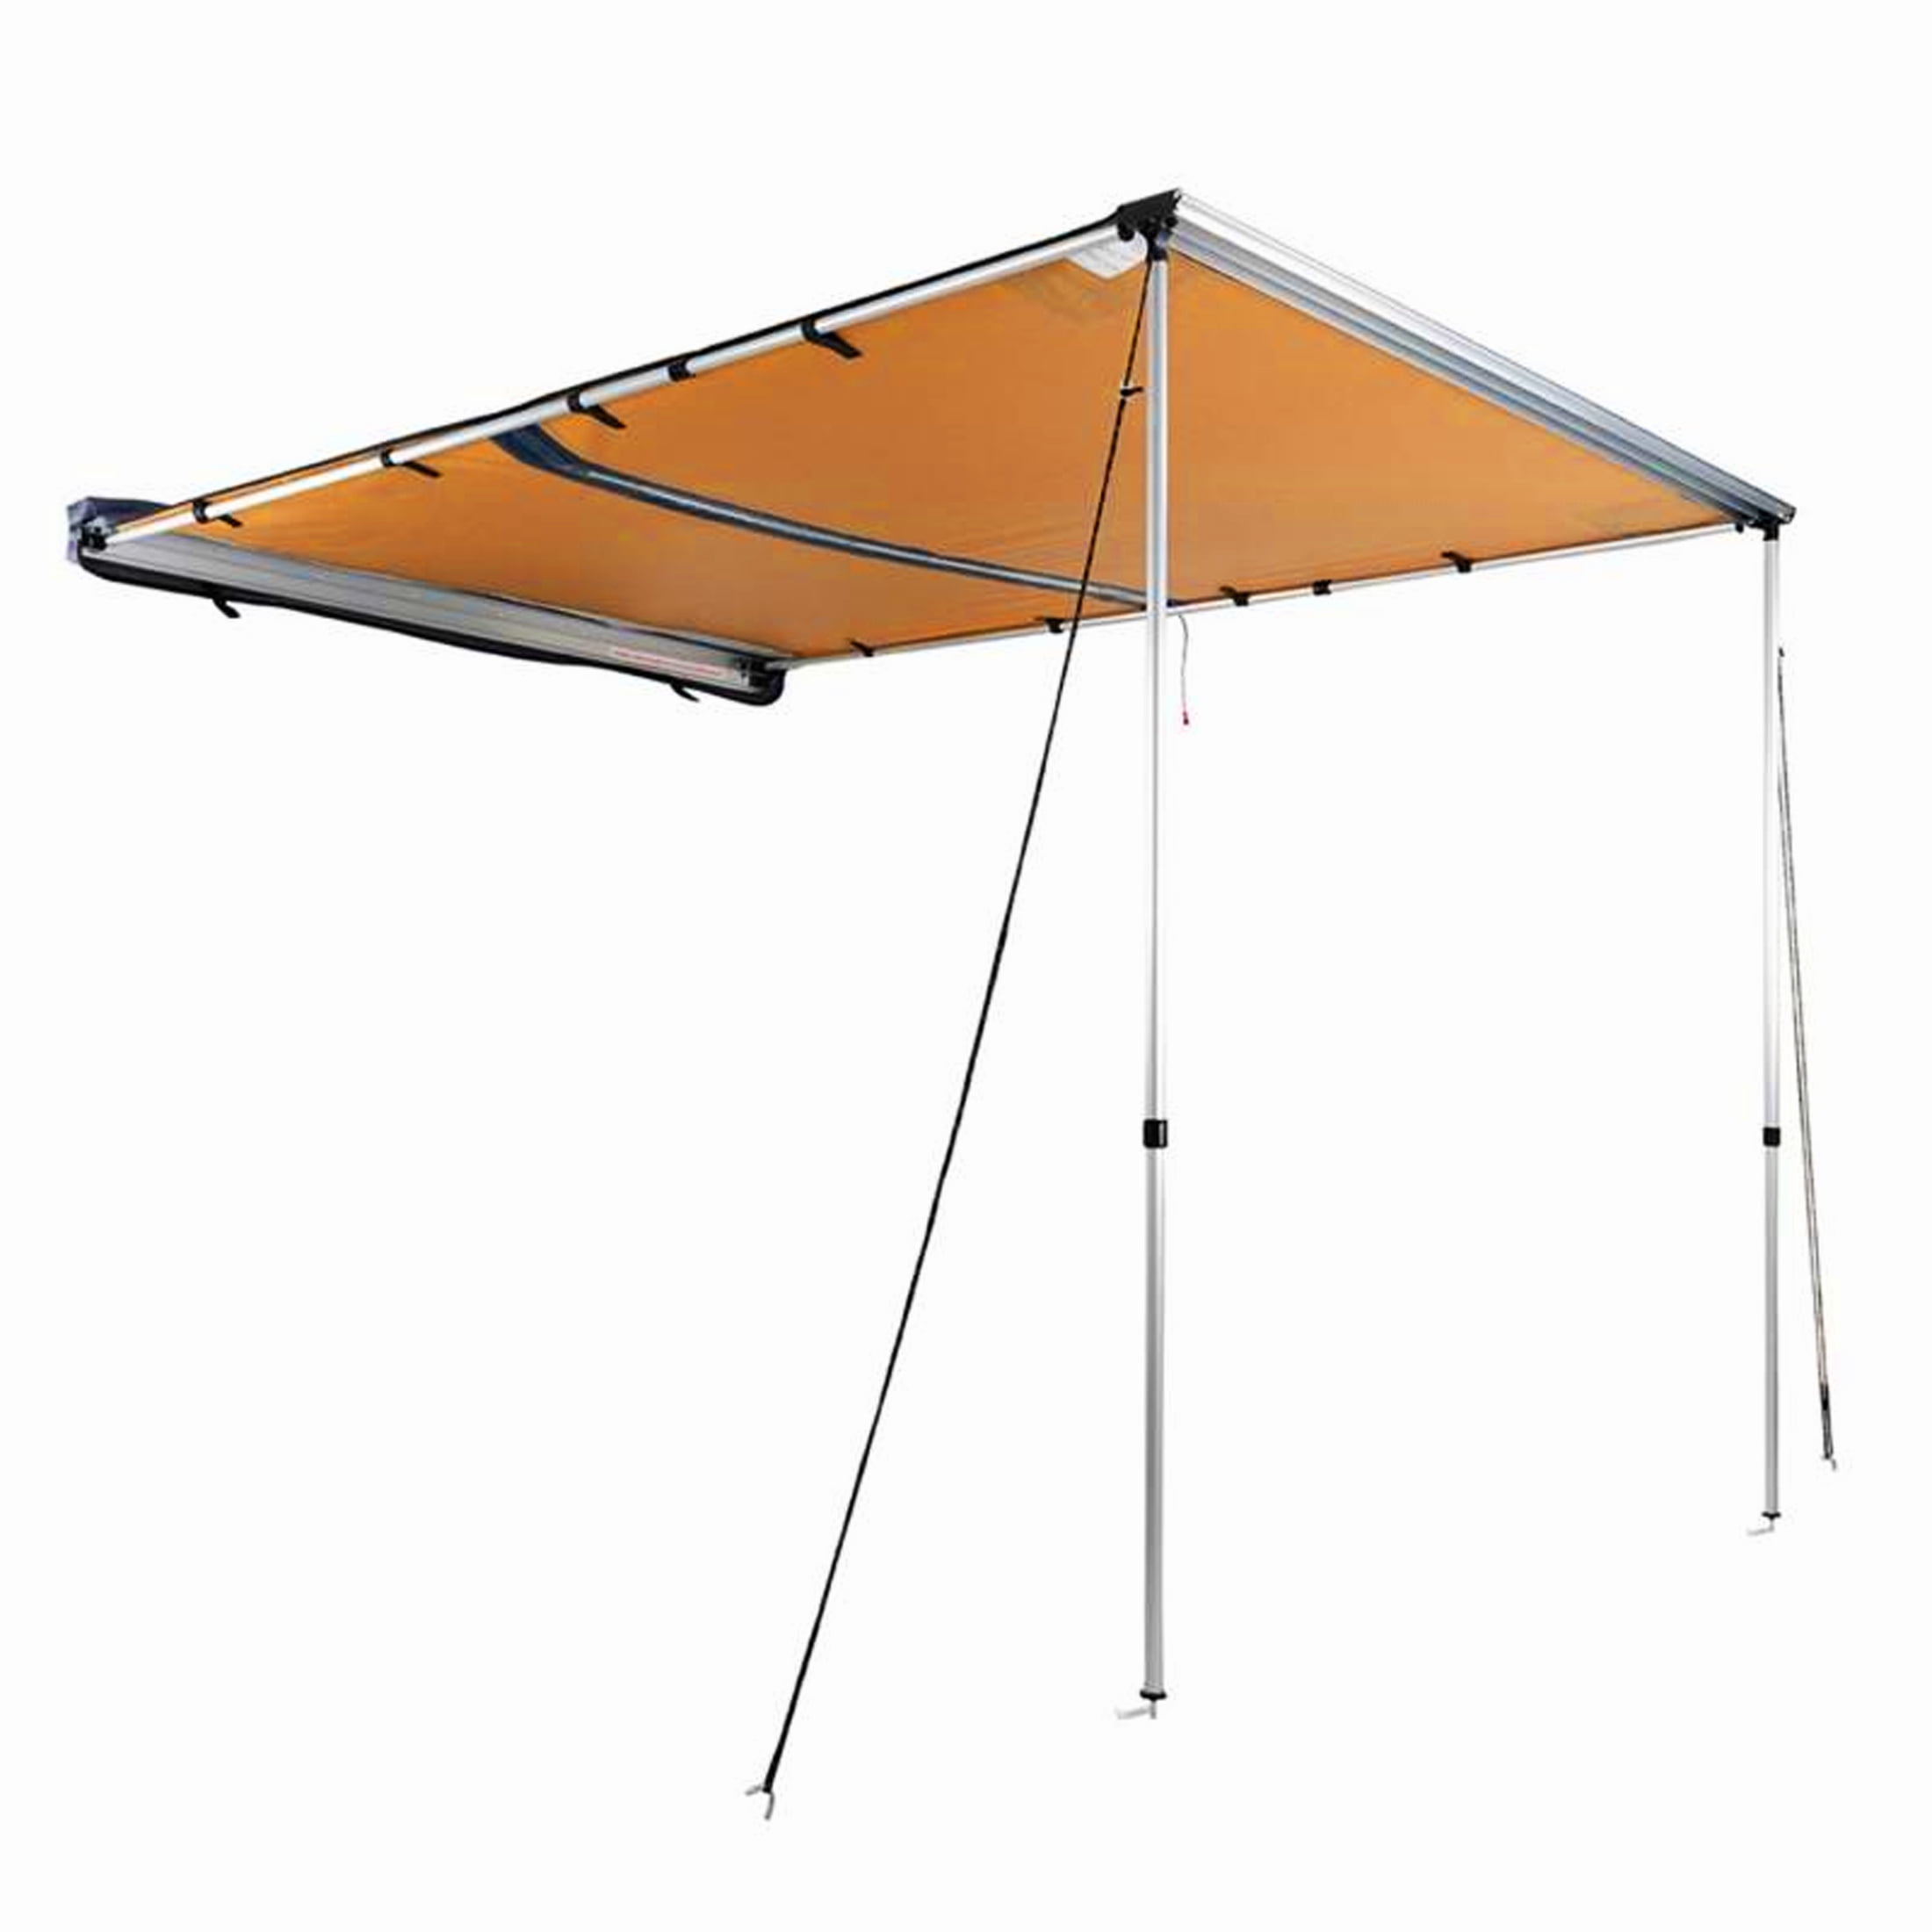  ARB 814301 Retractable Awning 1250 x 2100 mm 4x4 Accessories,  self-Standing Retractable awnings fit onto The Side of Most roof Racks and  roof Bars : Automotive